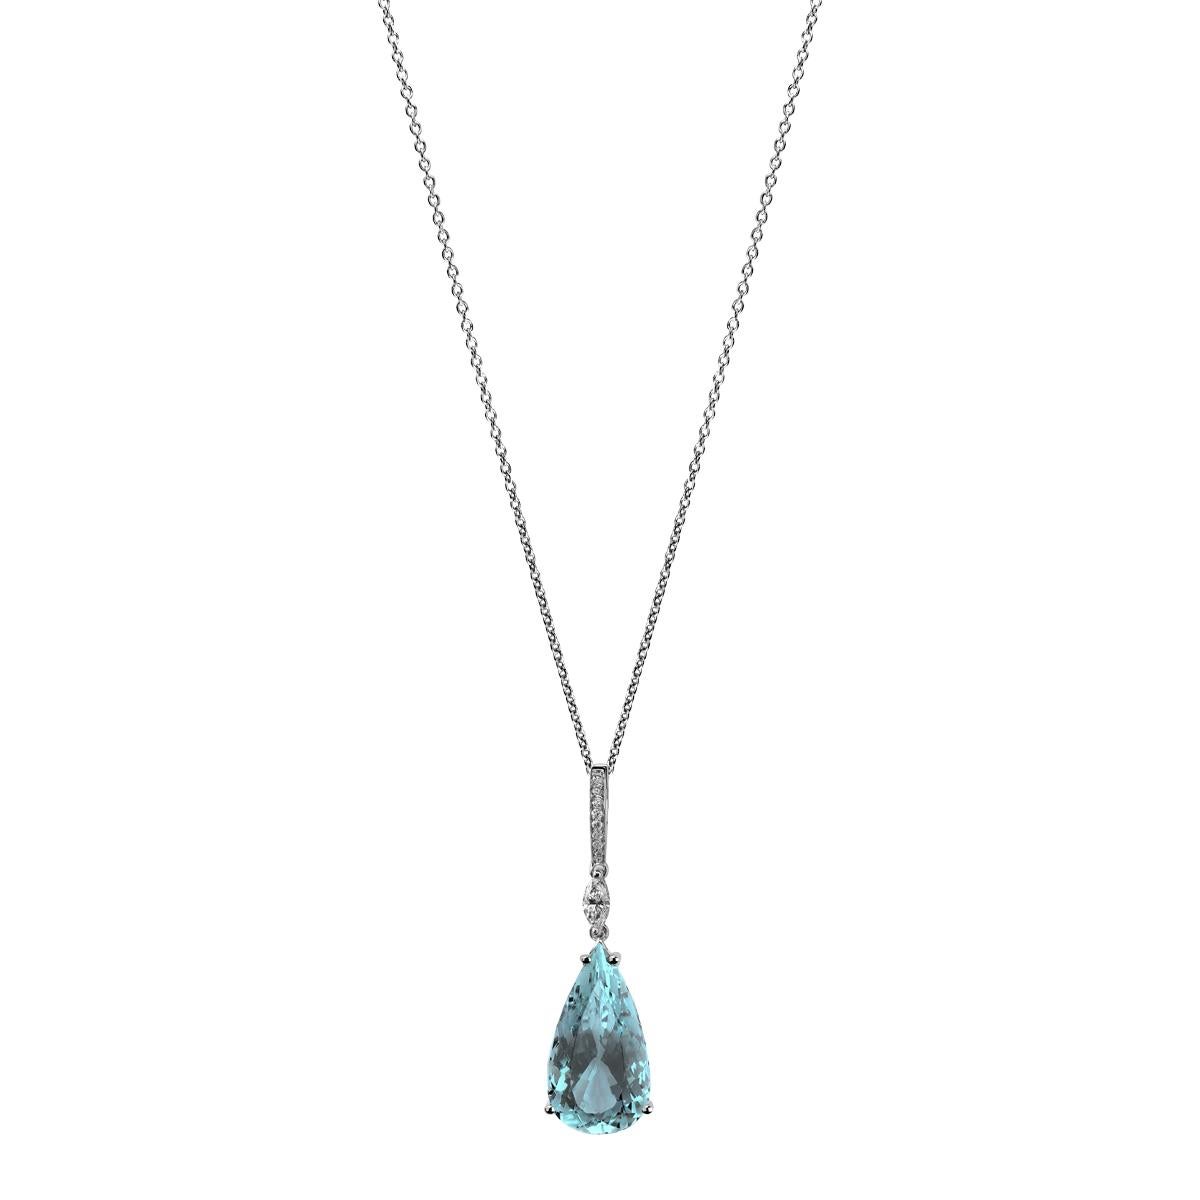 This sleek pendant necklace is crafted in 19.2K white gold and set a 11.04 carat drop shape aquamarine and diamonds. You will feel that are wearing a water like drop pendant.
This piece has been designed by Monseo and manufactured by Monseo artisans